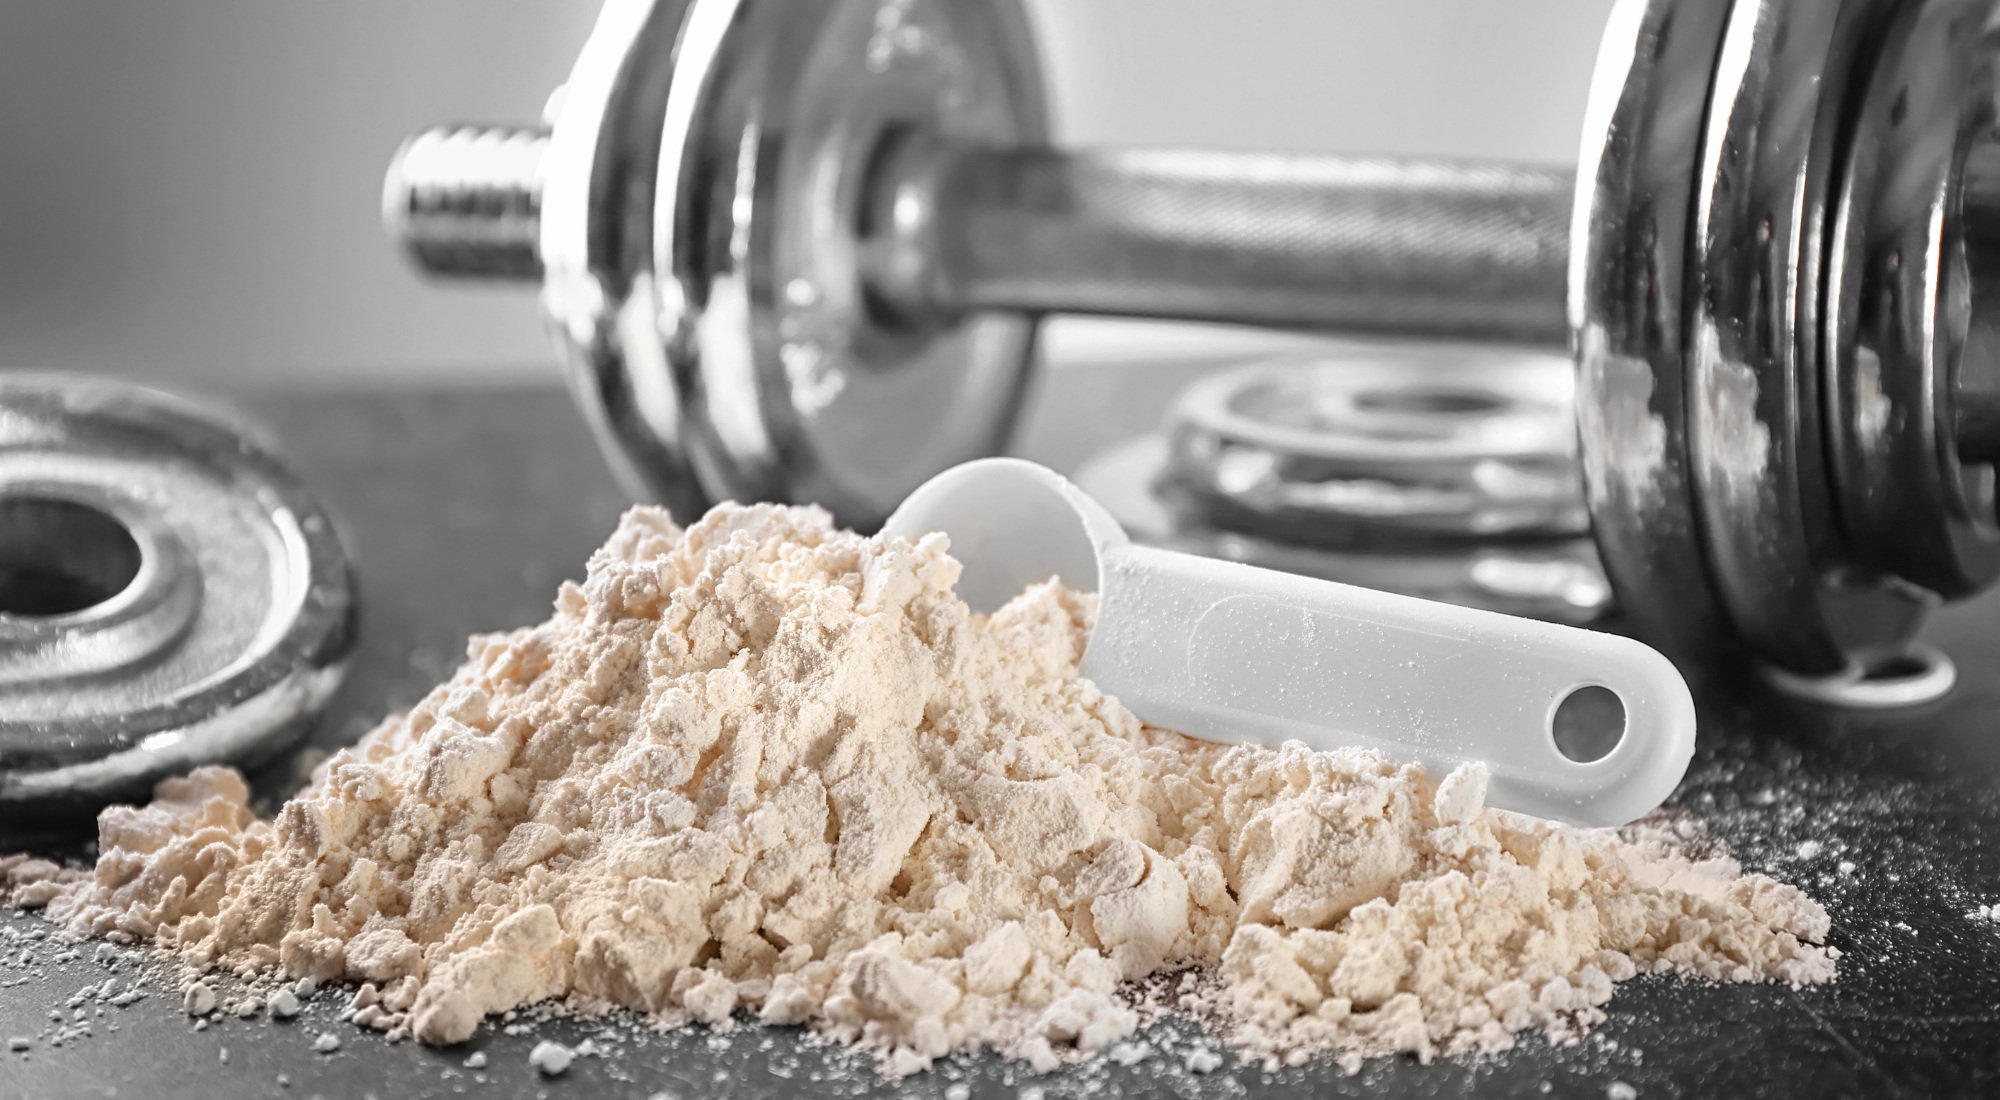 Pre-Workout Explained: Enhancing Your Exercise Routine